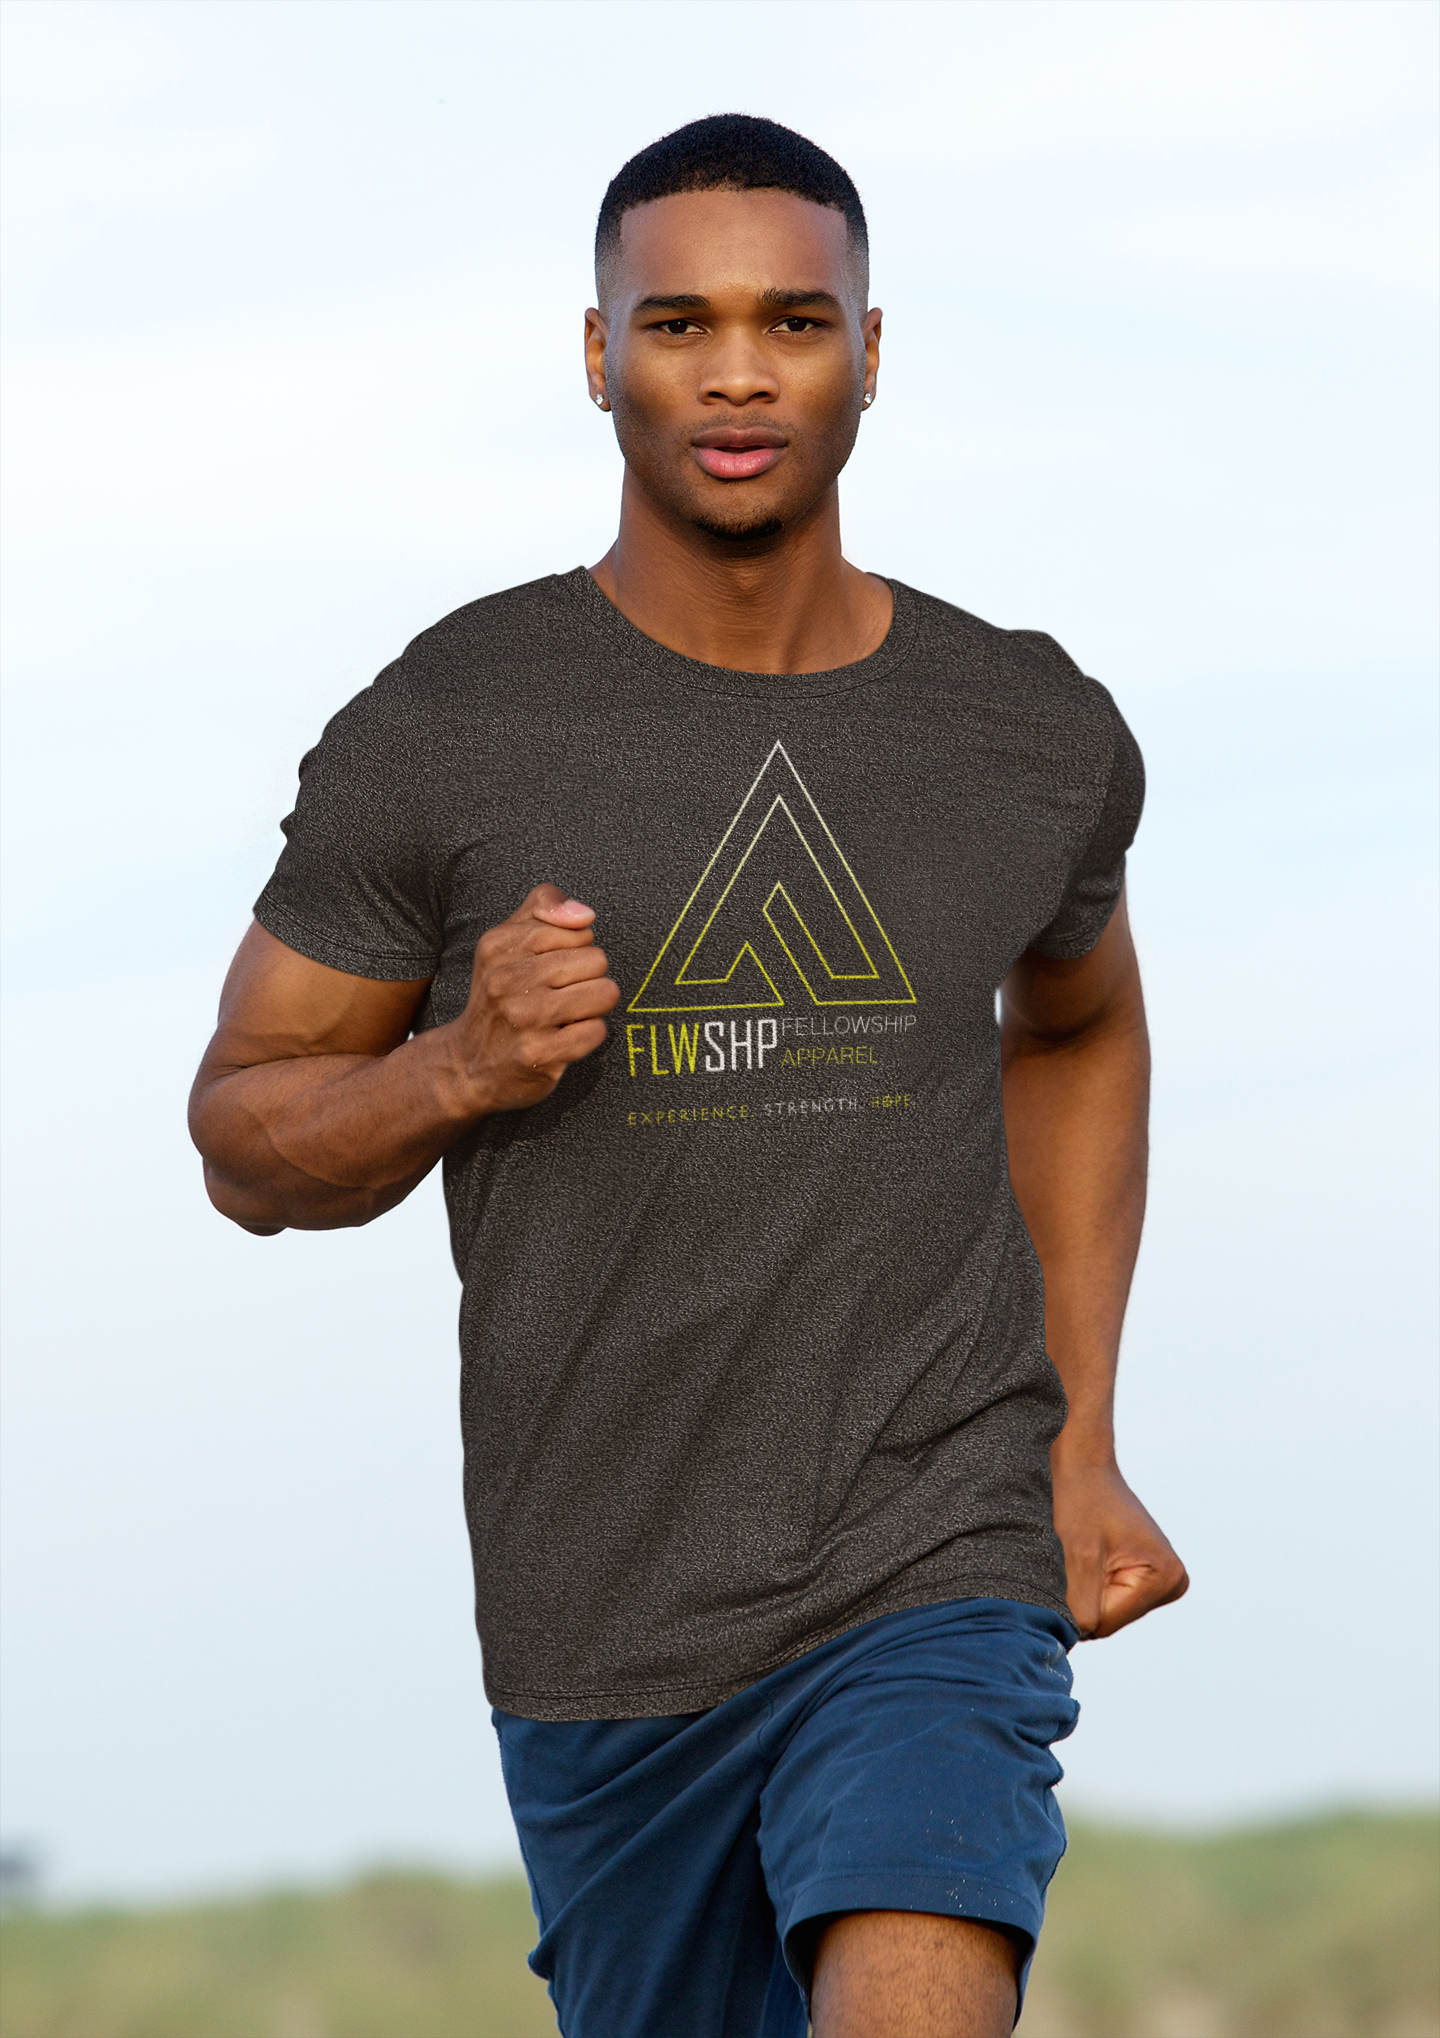 Men's Dri-Fit T-Shirts - The Fellowship's Experience, Strength, and Hope